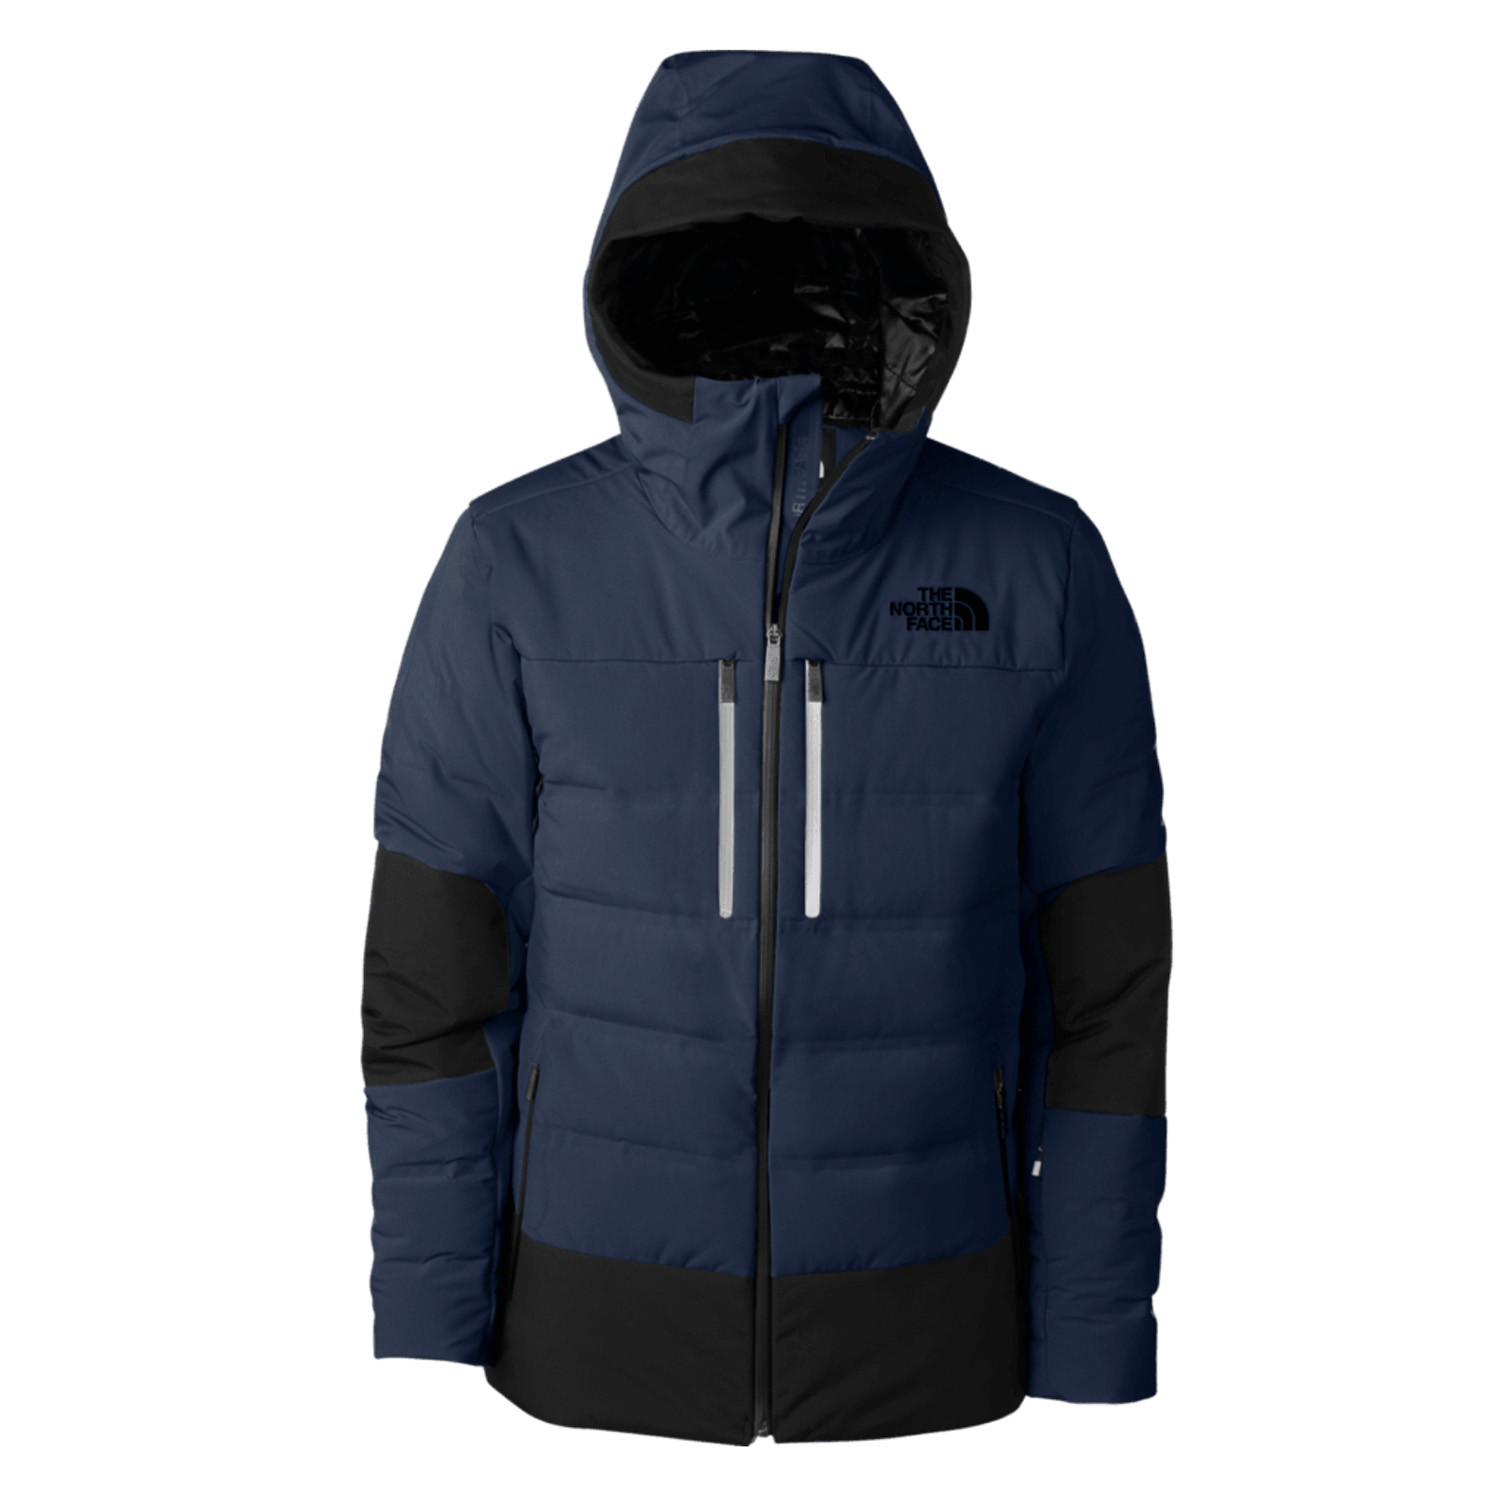 The North Face Validity Down Jacket | The Ski Monster